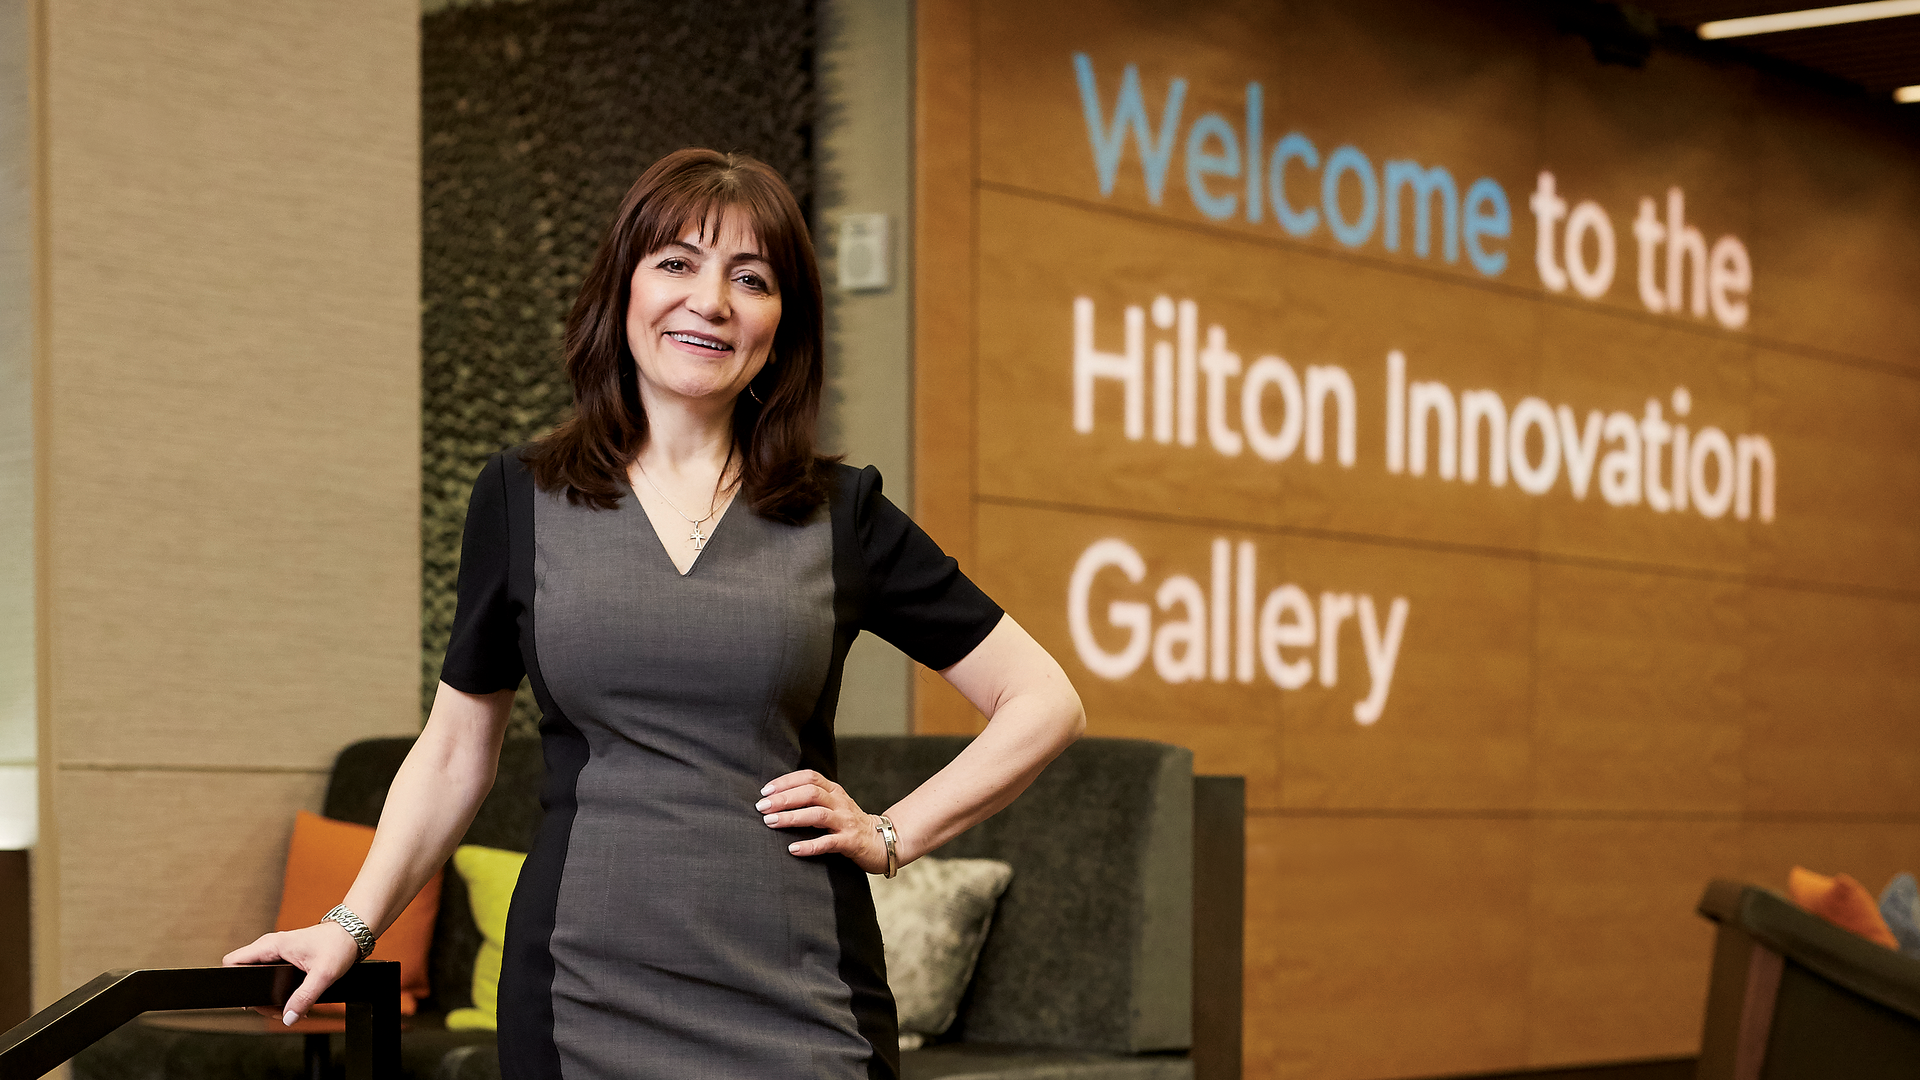 Vera Manoukian stands in the Hilton Innovation Gallery.